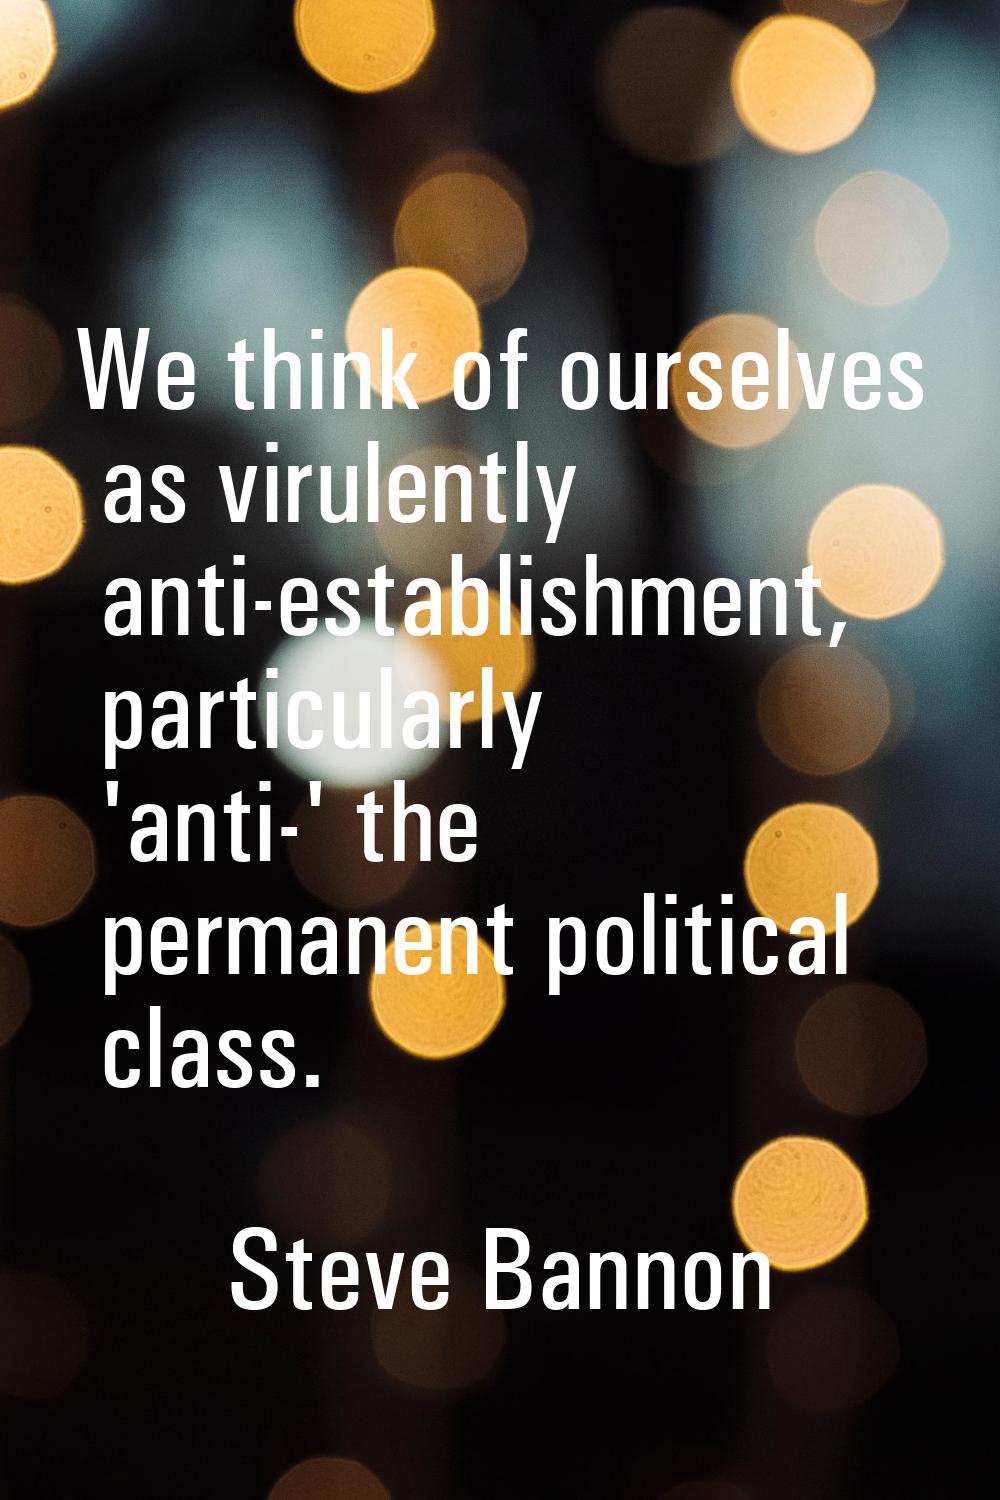 We think of ourselves as virulently anti-establishment, particularly 'anti-' the permanent politica